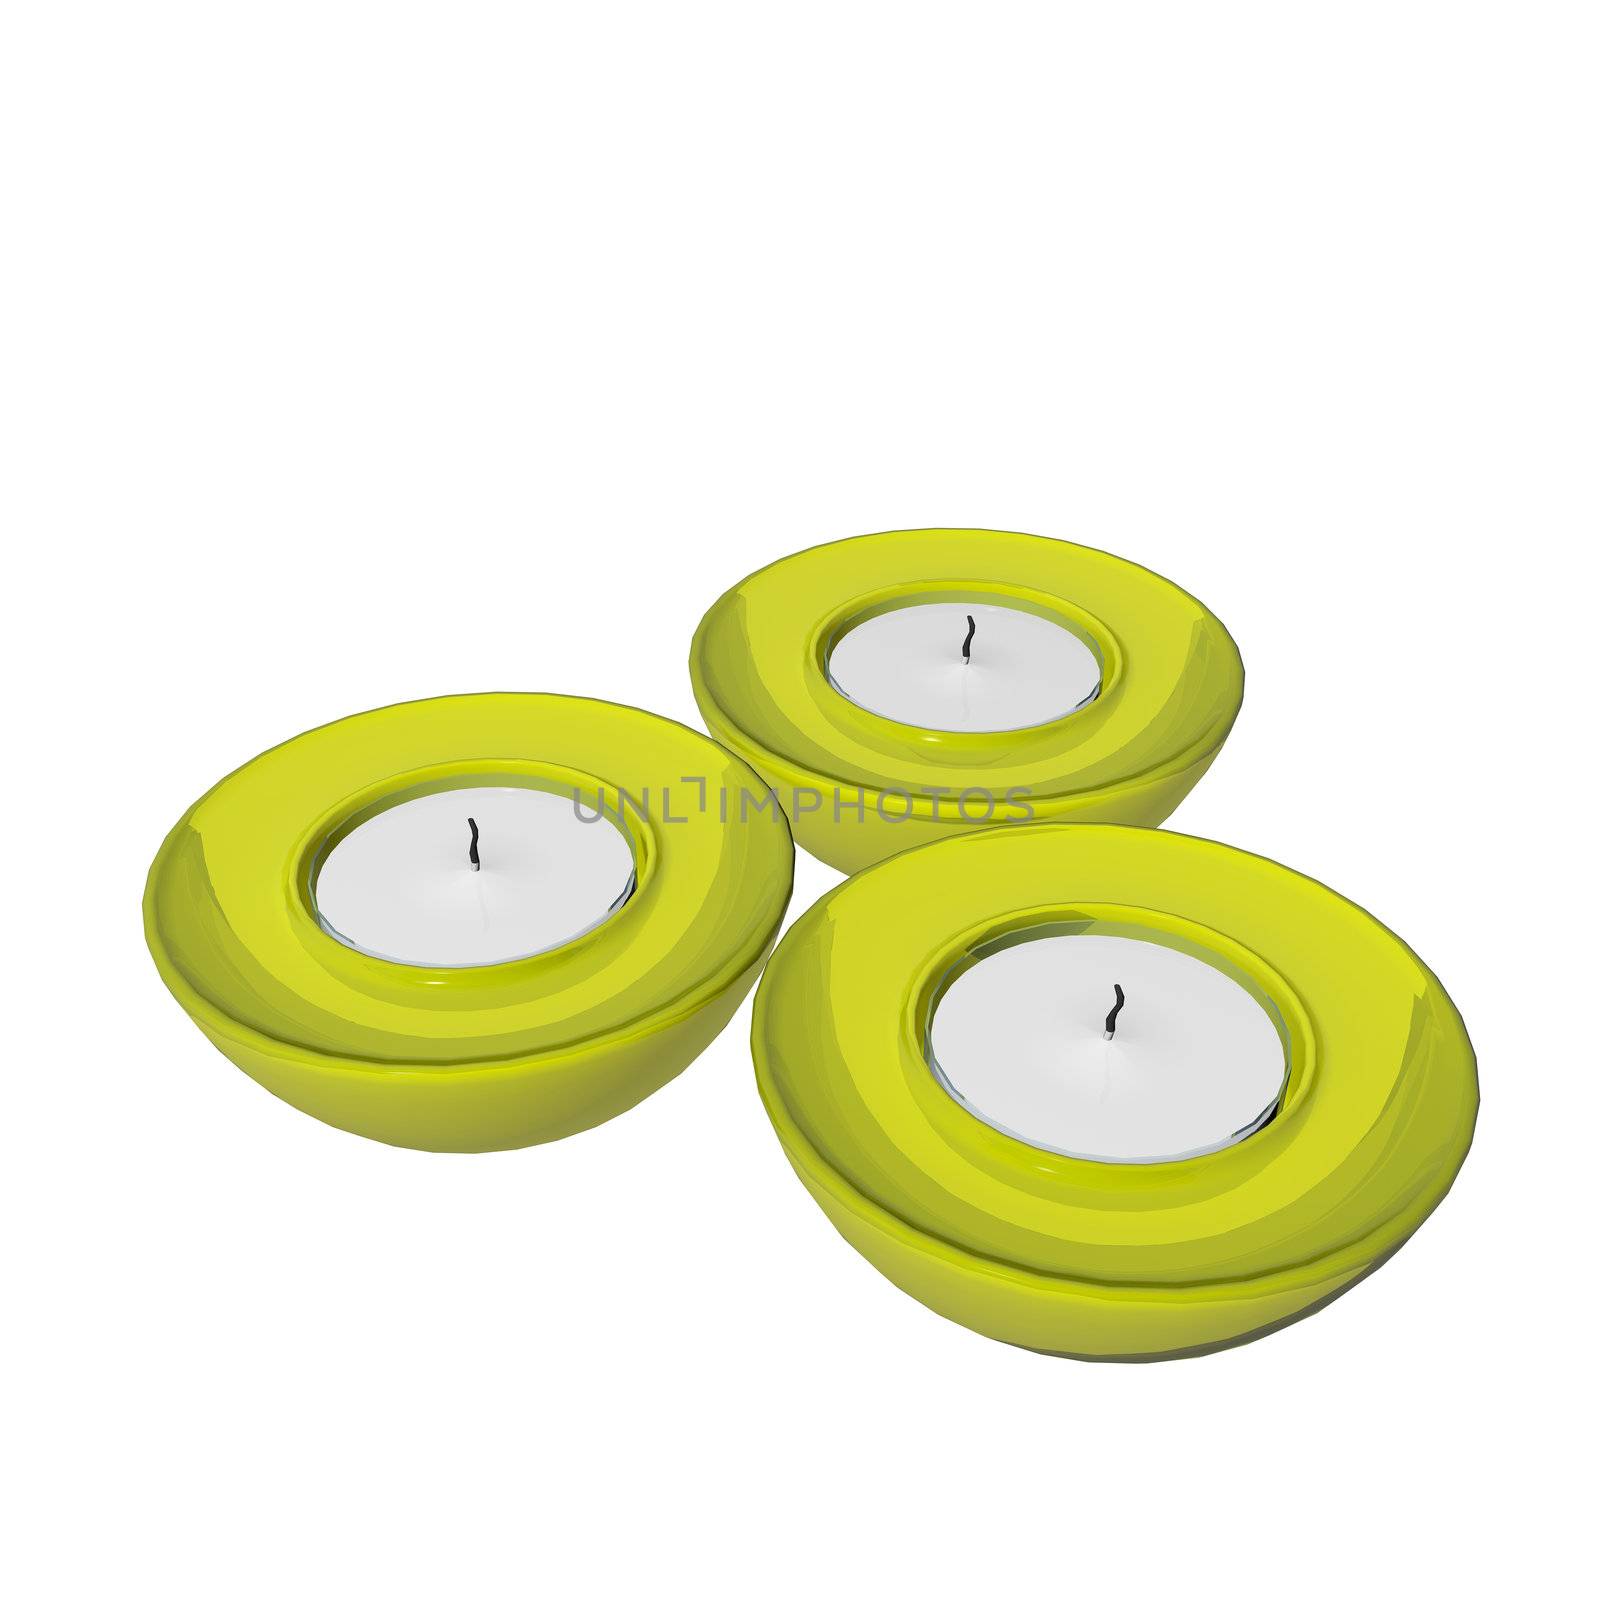 Yellow round ceramic candle holders, 3D illustration by Morphart